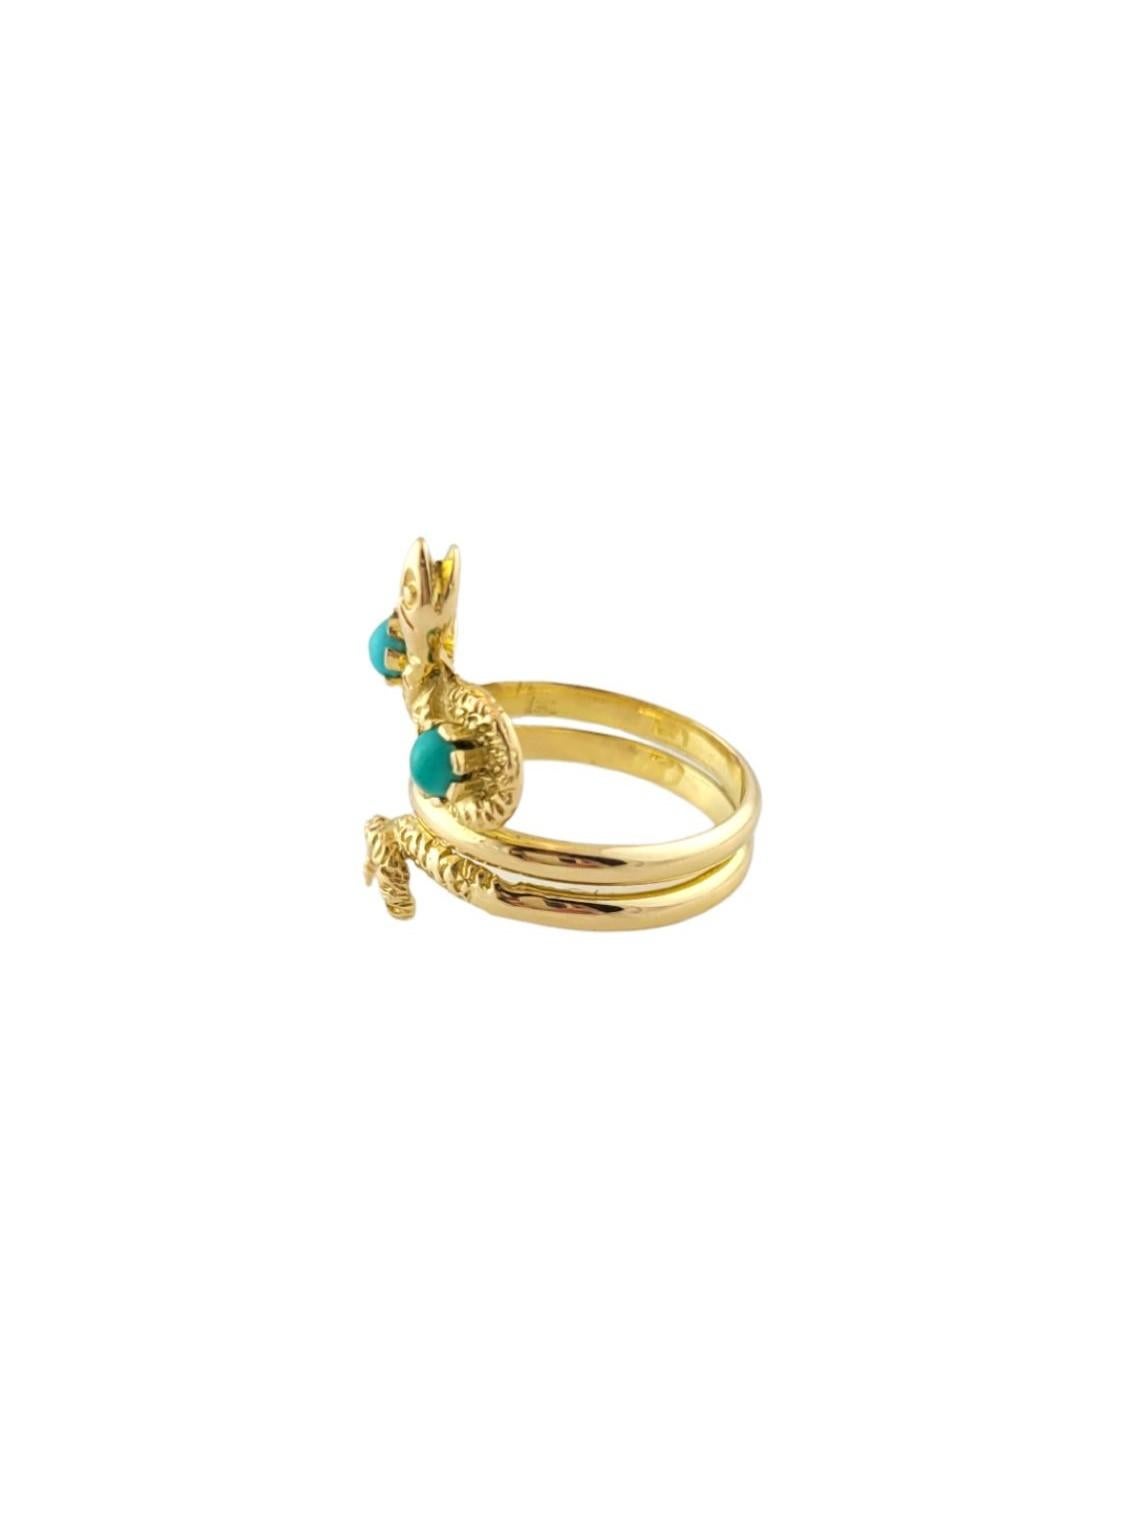 Women's 18 Karat Yellow Gold and Turquoise Snake Ring Size 7.5 #16616 For Sale